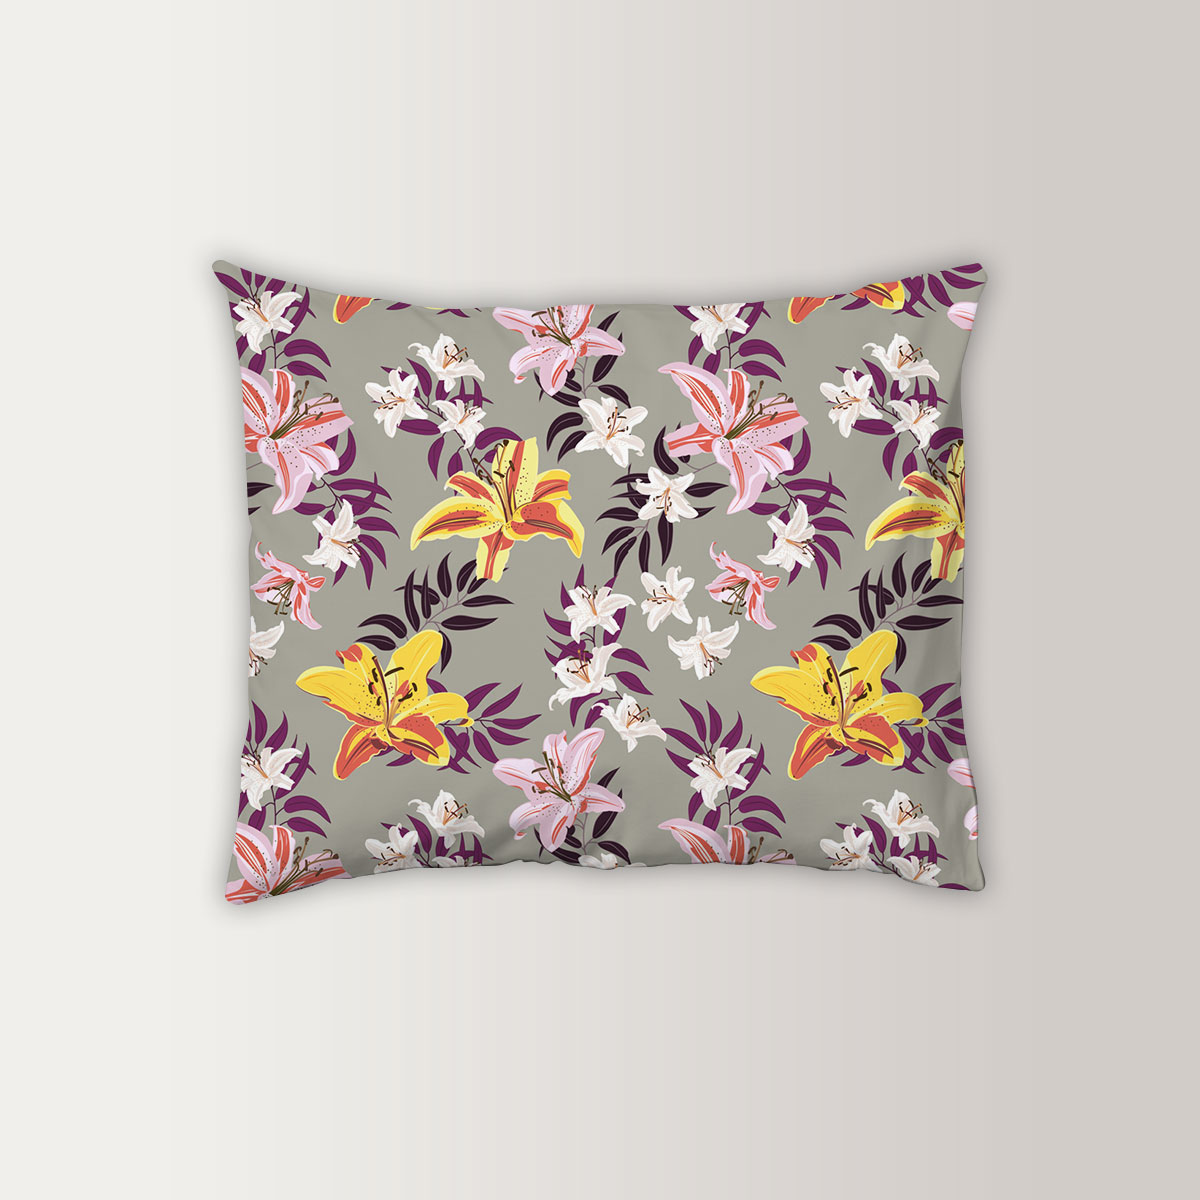 Vintage Lily Flower On Gray Background Pillow Case